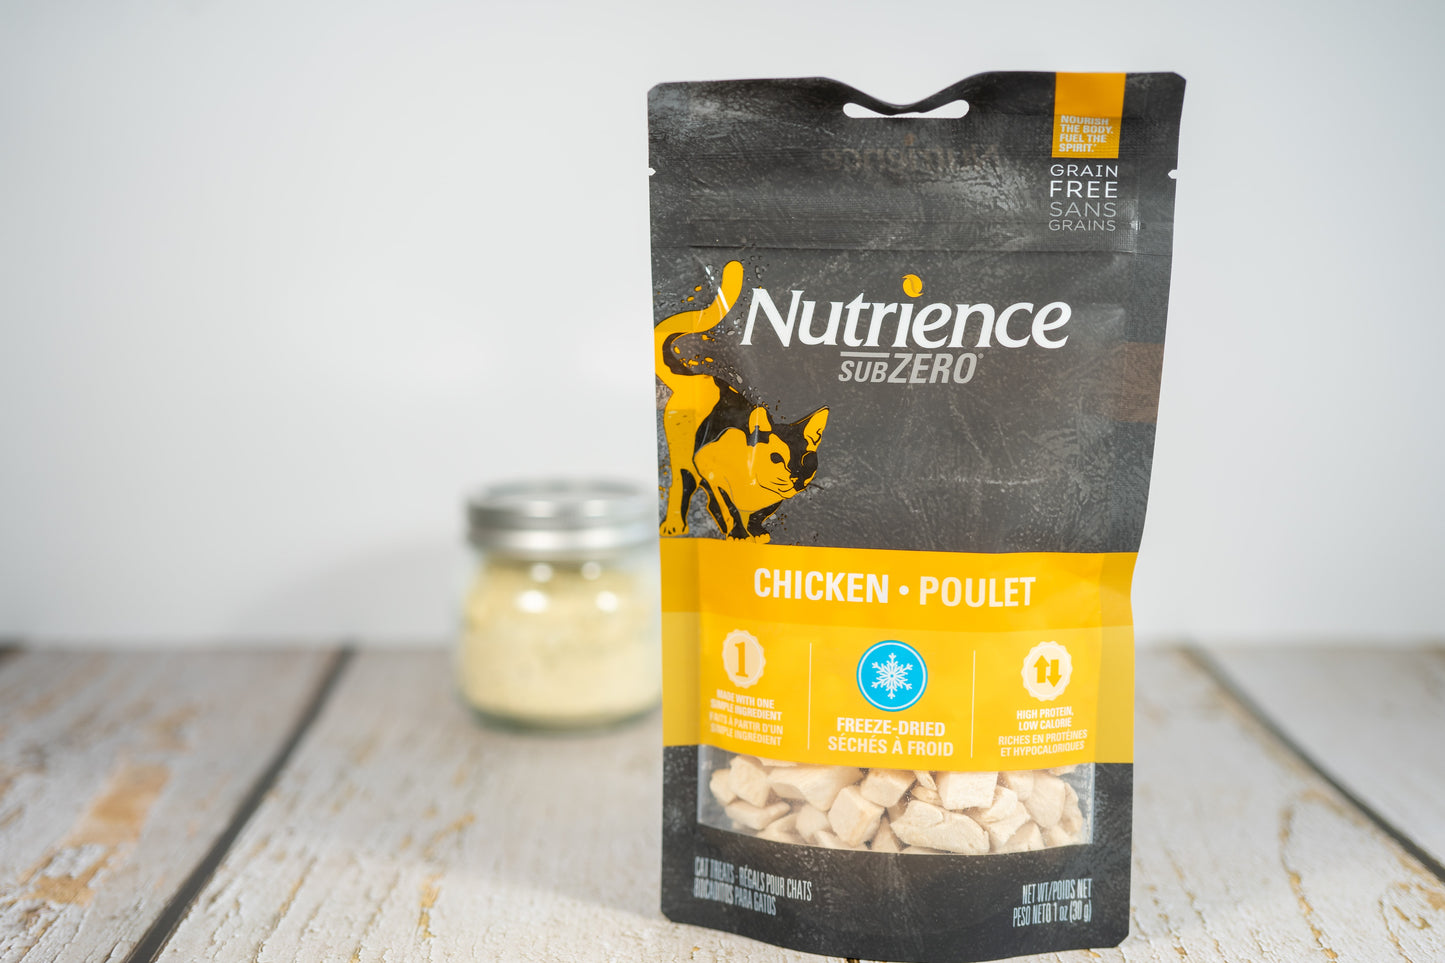 Grain free cat treats made with 1 simple ingredient: chicken.